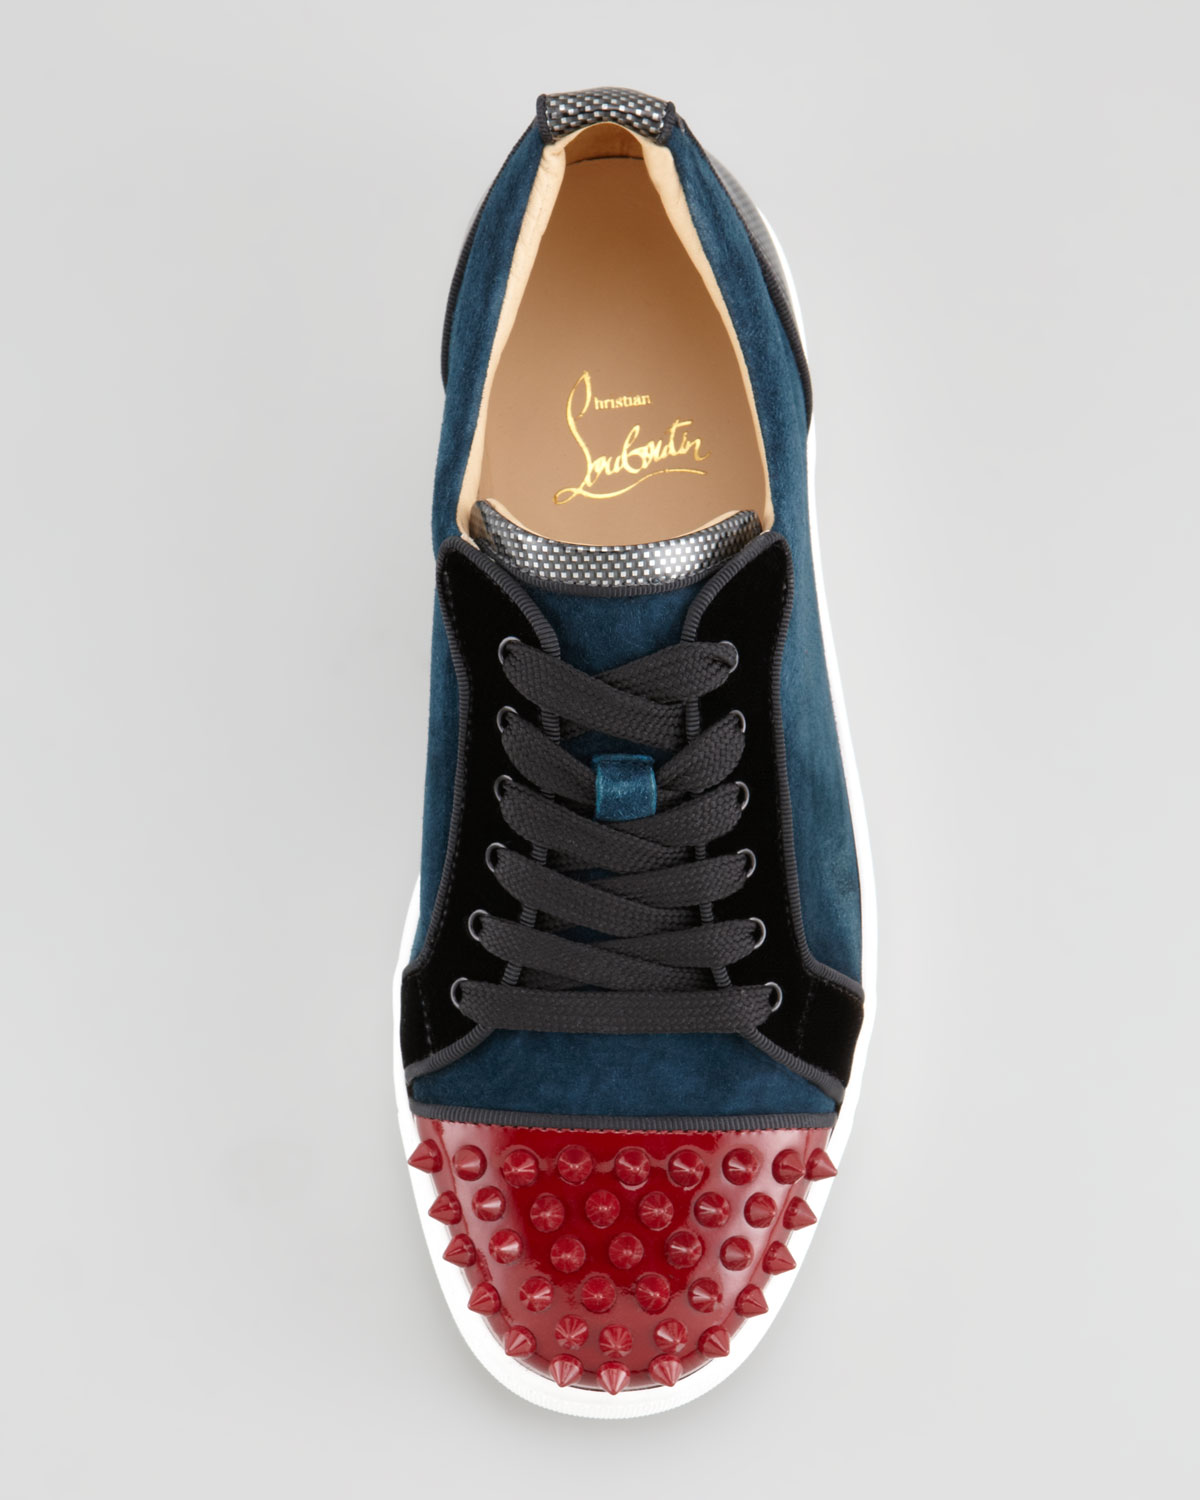 christian louis vuitton red bottom shoes - Christian louboutin Louis Junior Spikes Low-top Sneaker in Blue ...